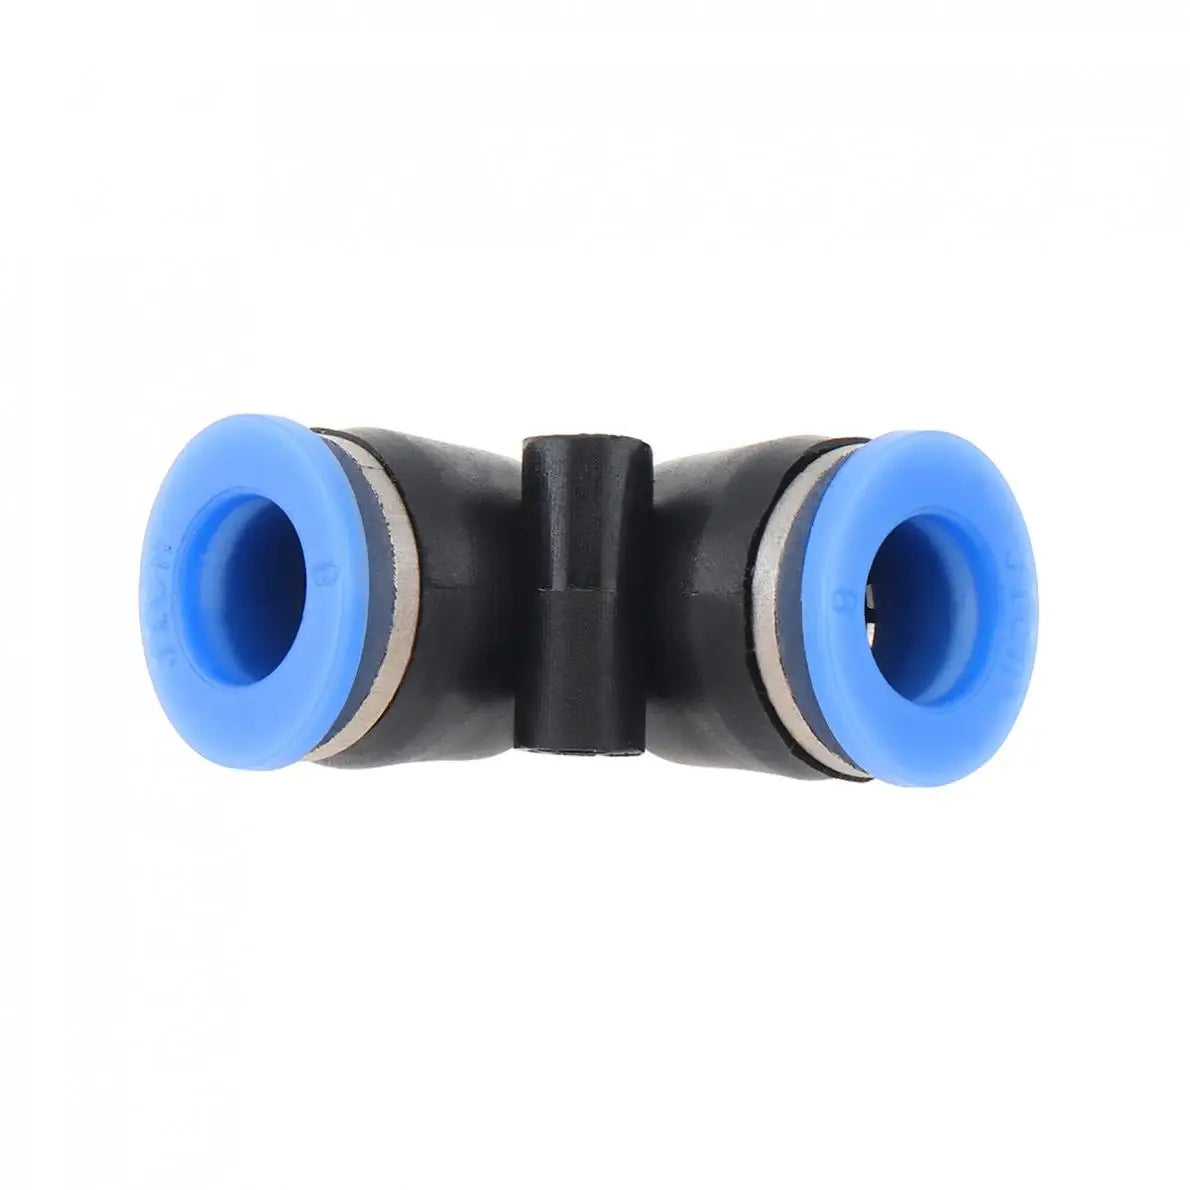 2pcs 8mm L Shaped Elbow Plastic Two-way Pneumatic Quick Connector Pneumatic Insertion Air Tubes